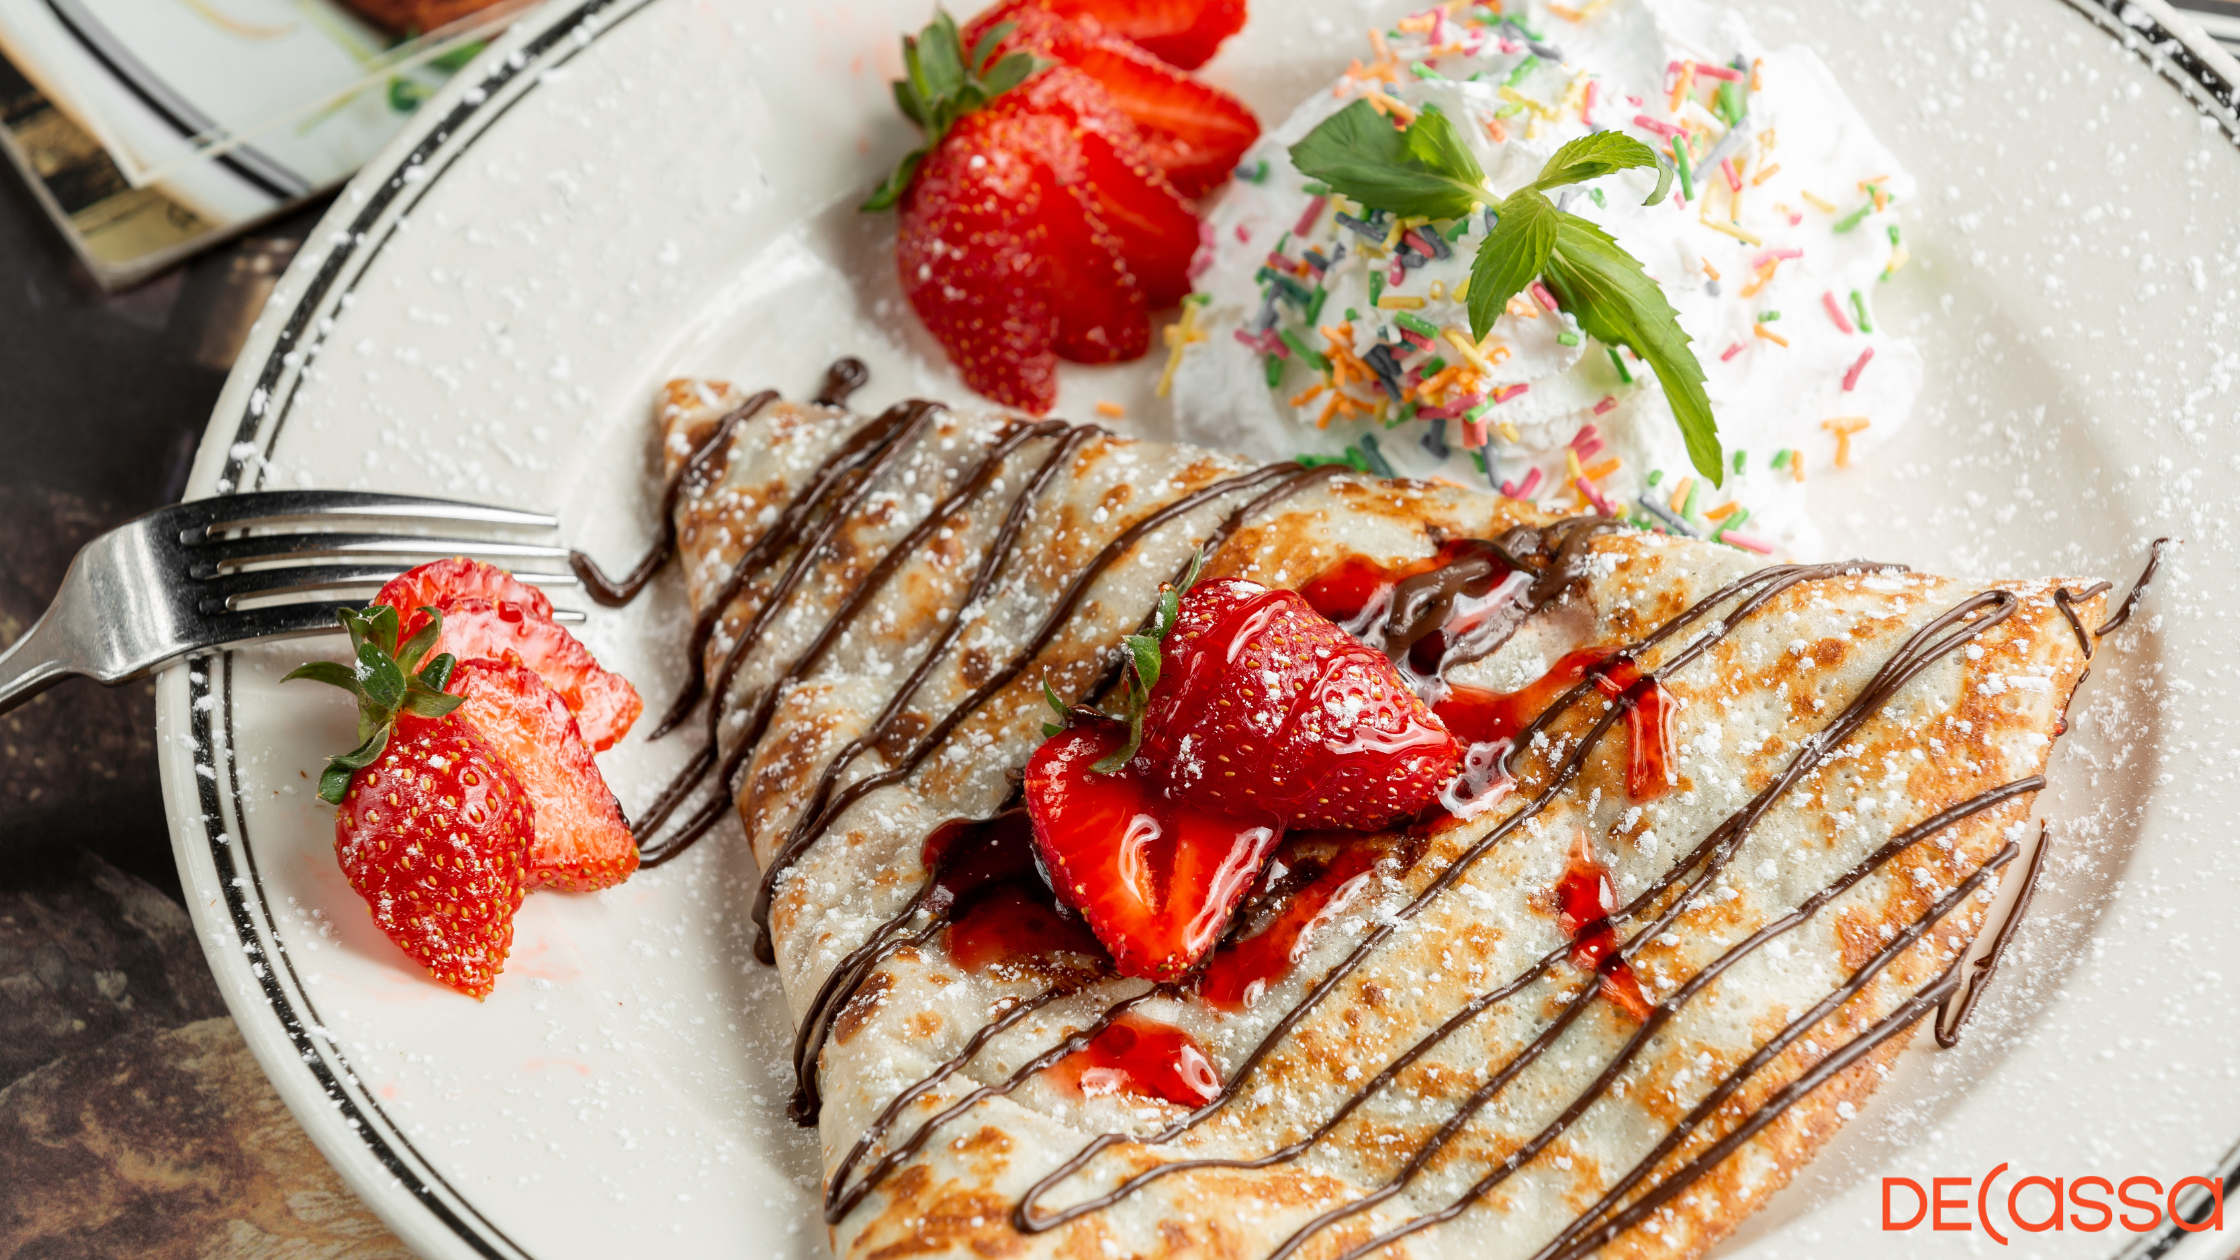 A beautiful Crepe Pancake on a white plate with chocolate sauce and topped with strawberries with a side of whipped cream